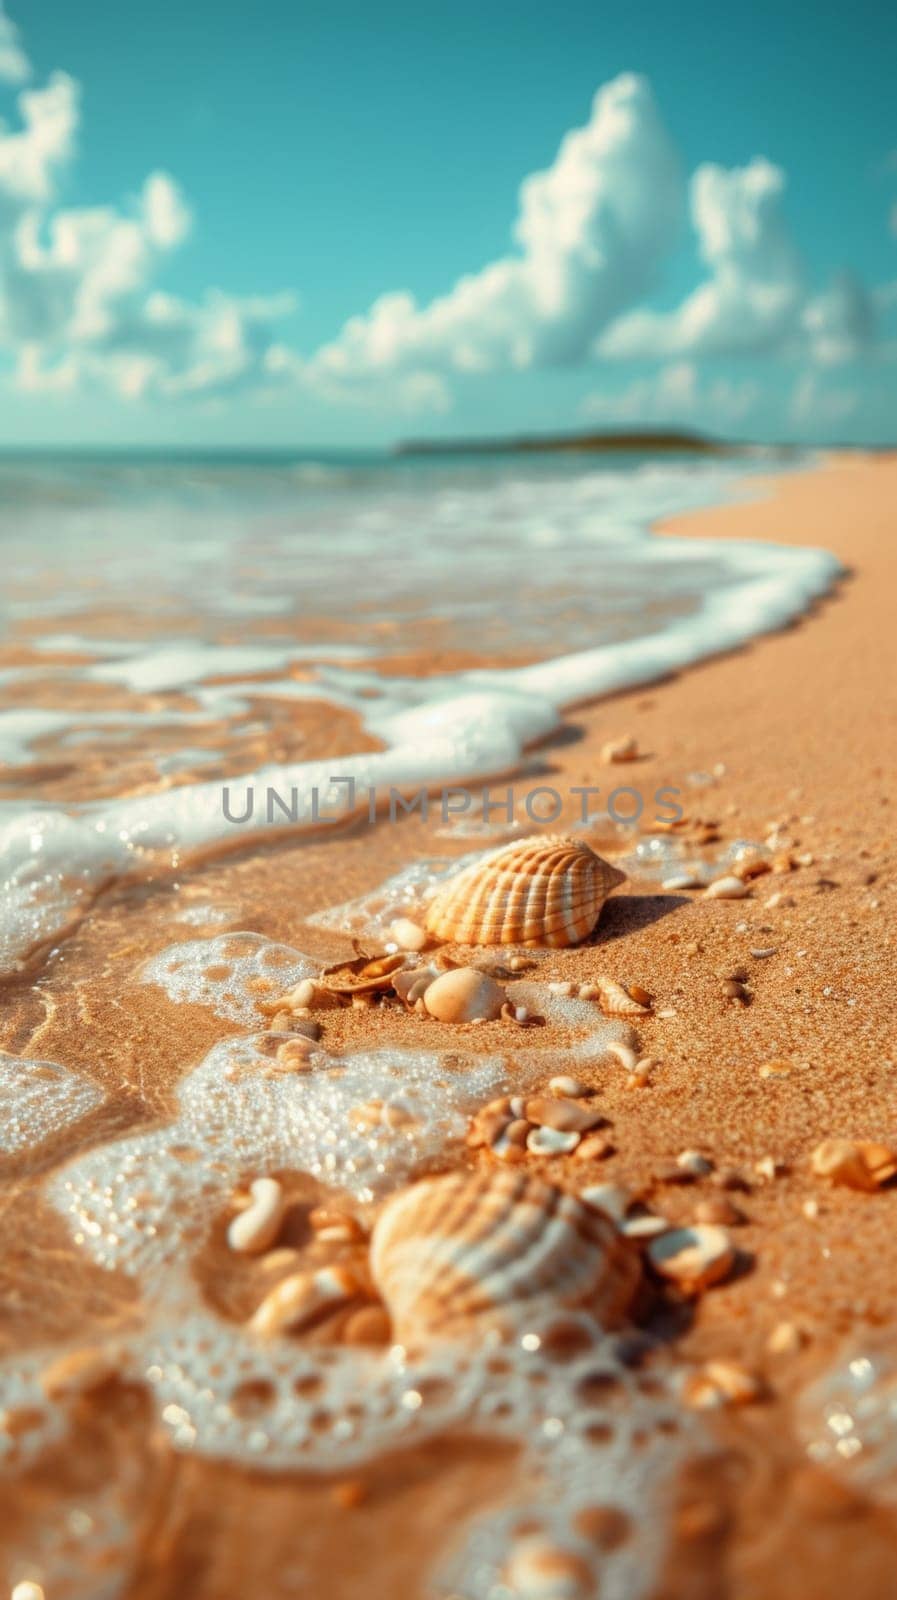 A beach with shells on the sand and waves in the background